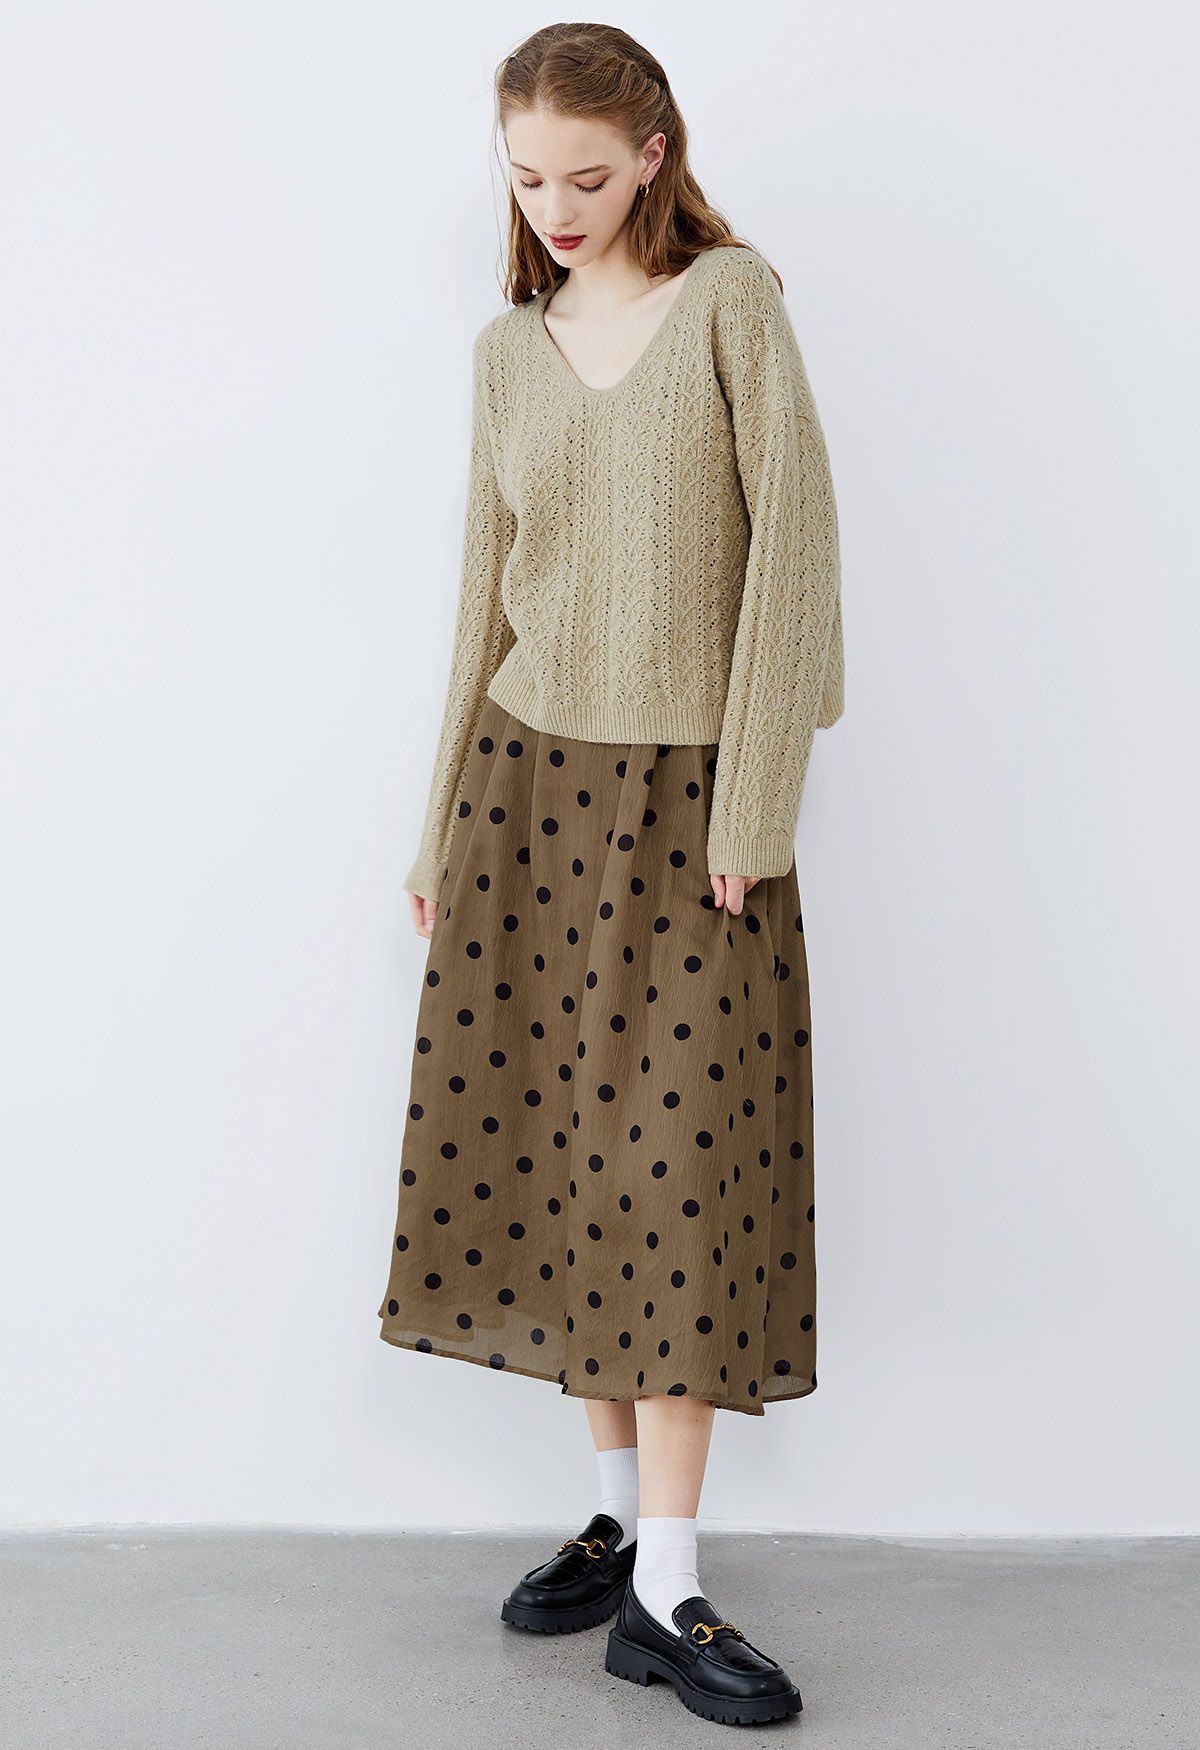 V-Neck Pointelle Knit Sweater in Light Tan - Retro, Indie and Unique Fashion